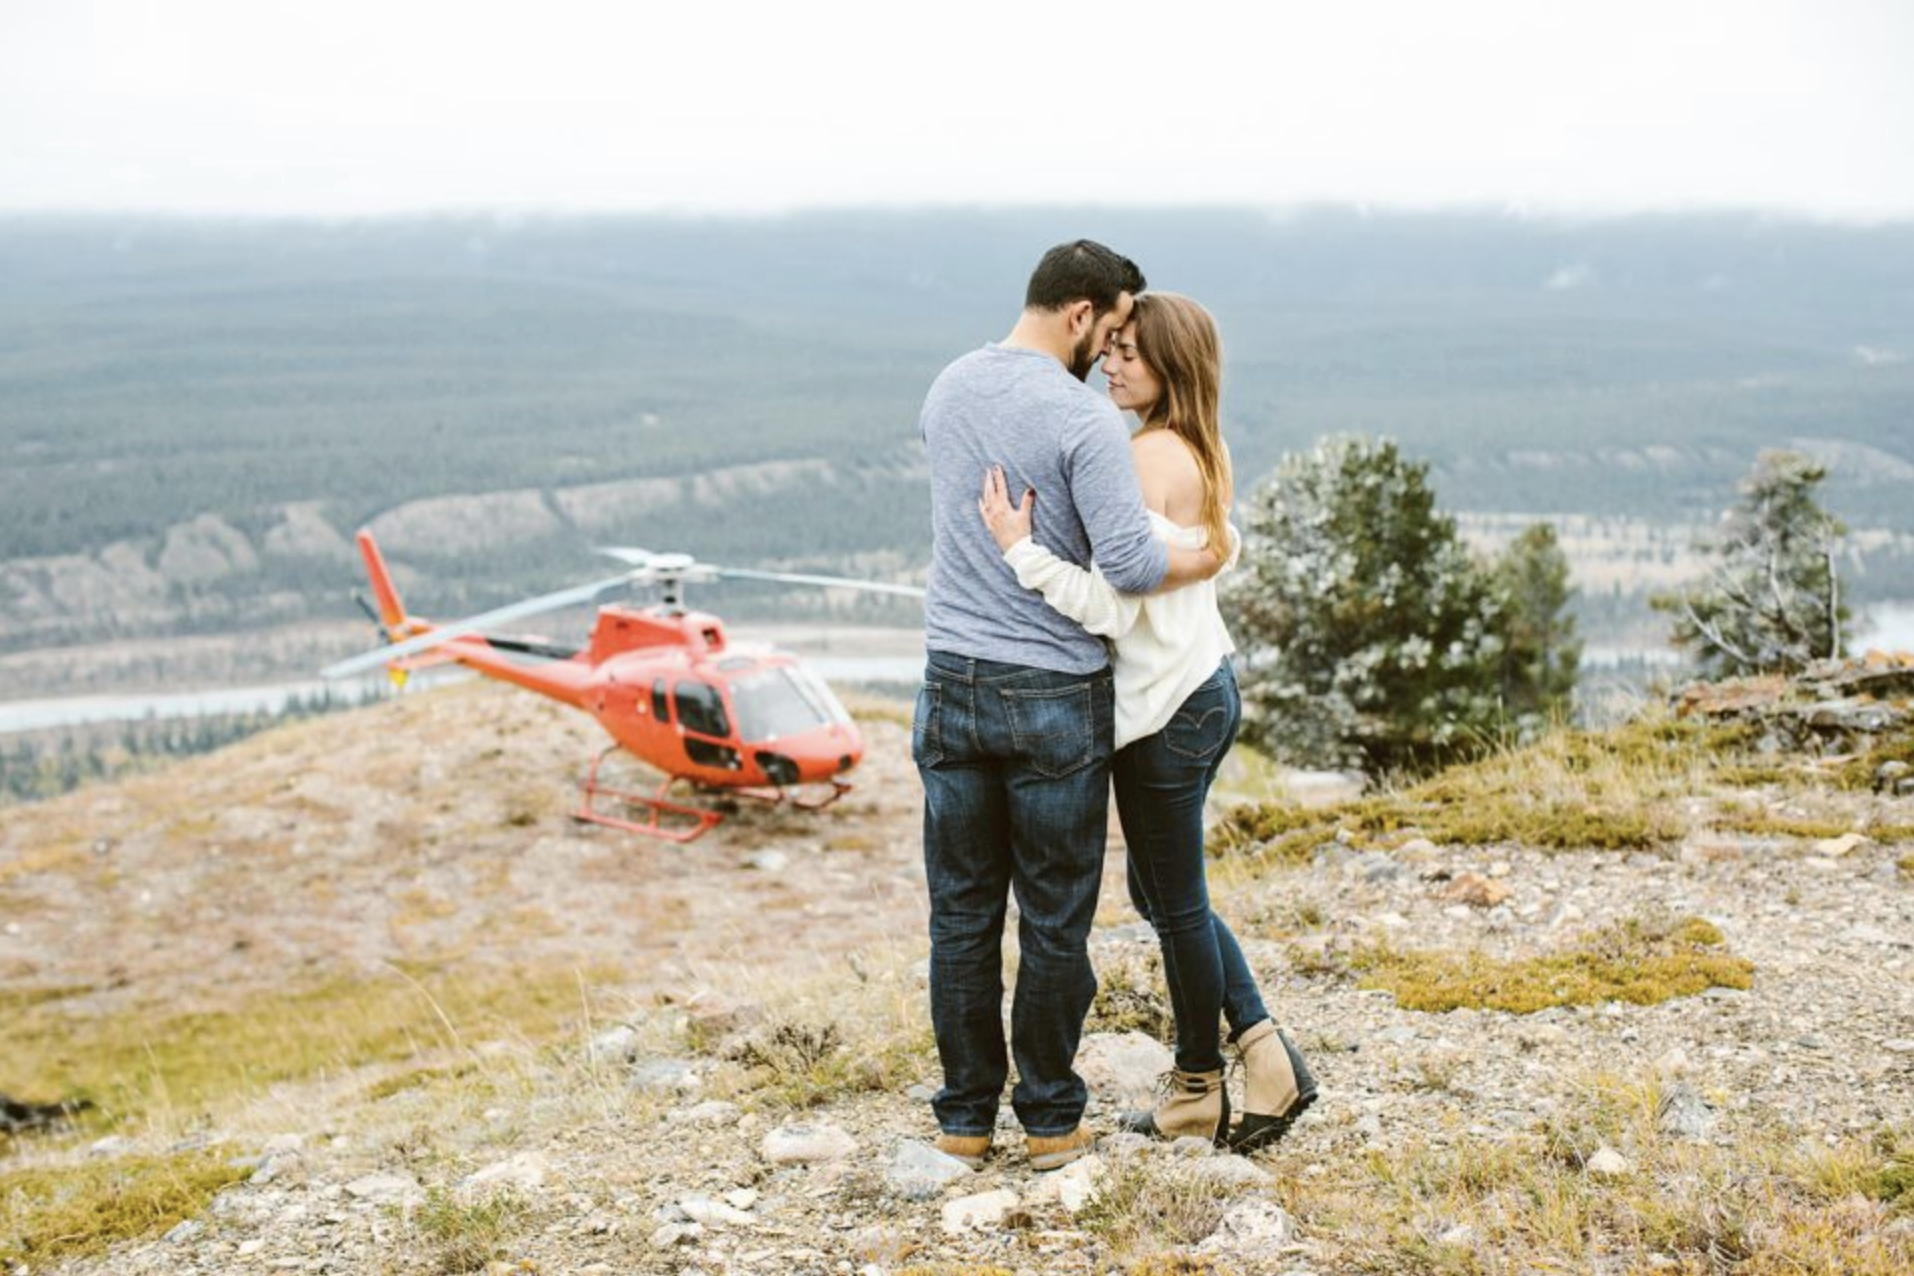 6. Canadian Rockies Private Helicopter Tour and Hike for Two